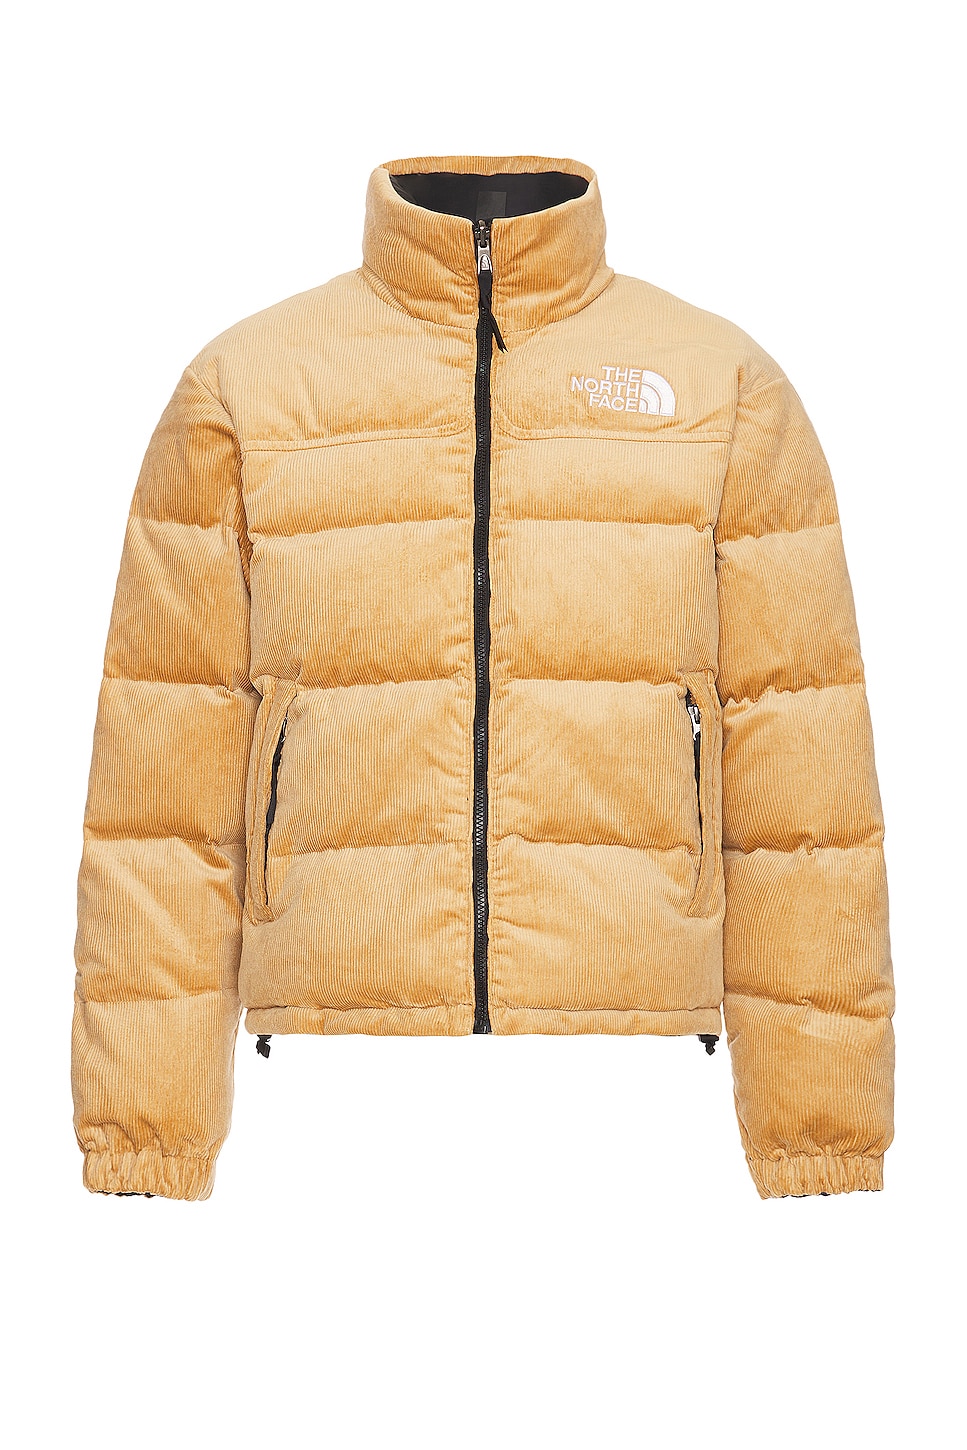 Image 1 of The North Face 92 Reversible Nuptse Jacket in Almond Butter & Tnf Black